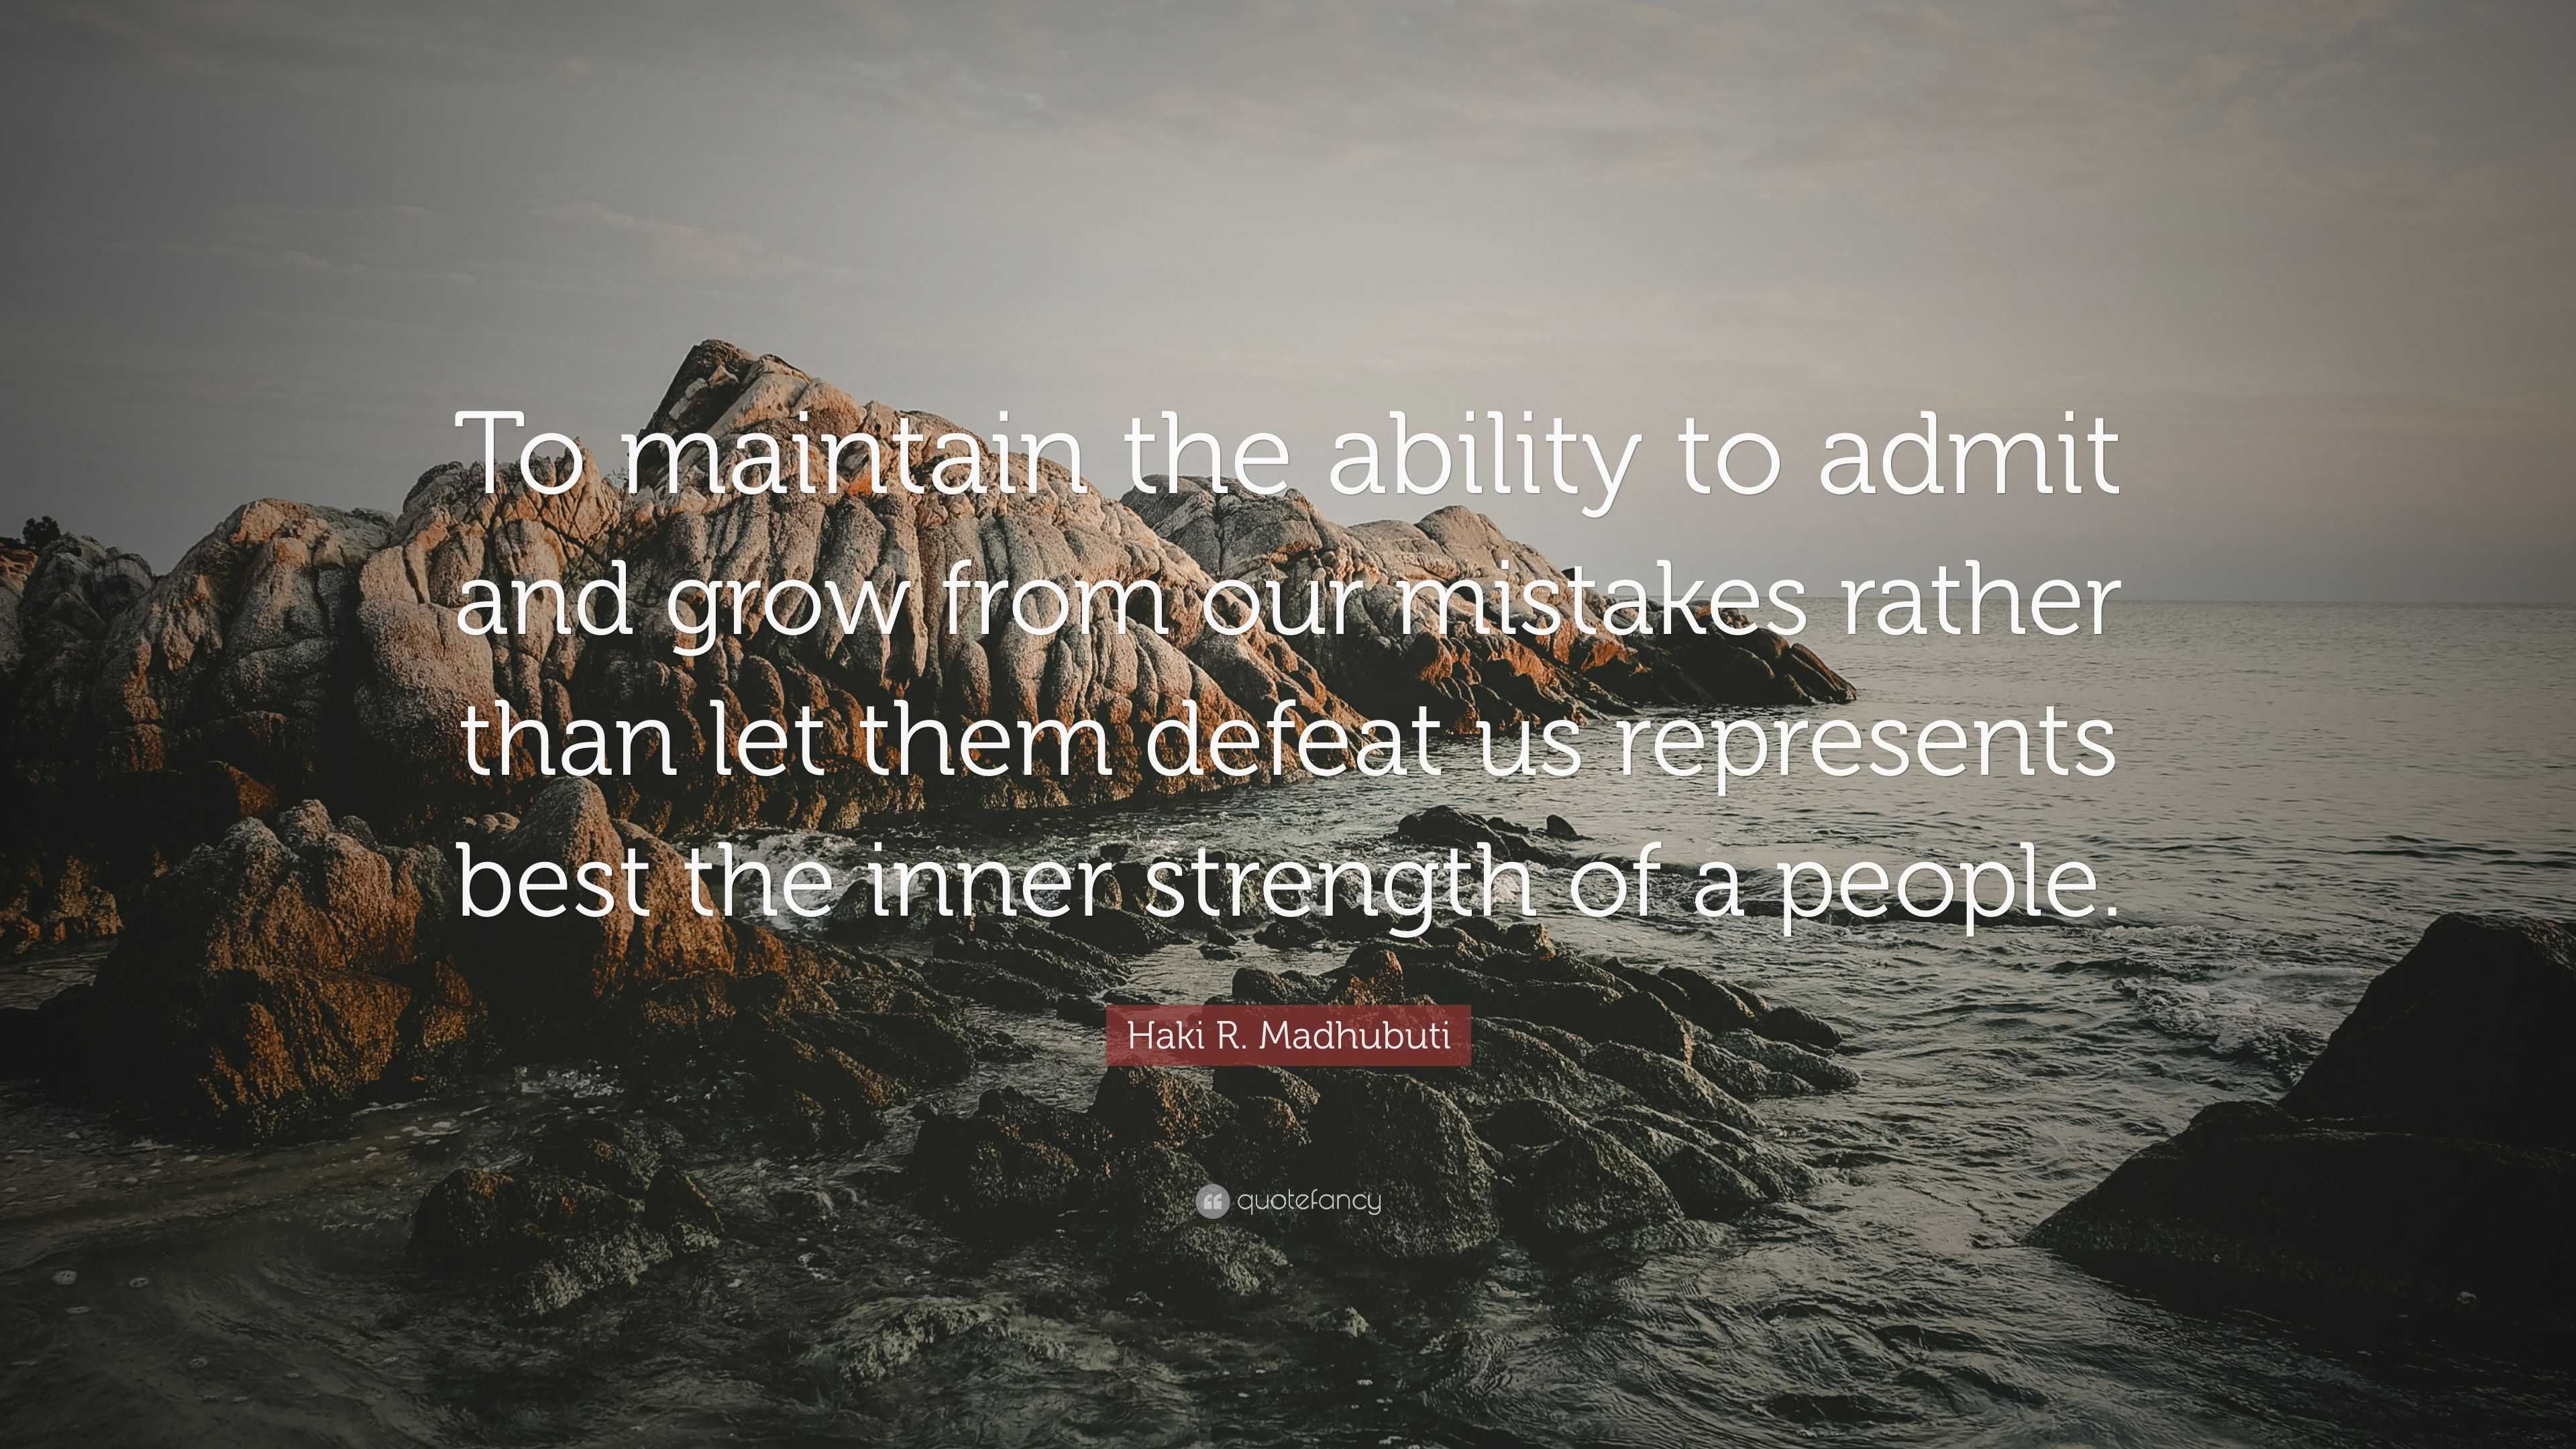 Haki R. Madhubuti Quote: “To maintain the ability to admit and grow ...